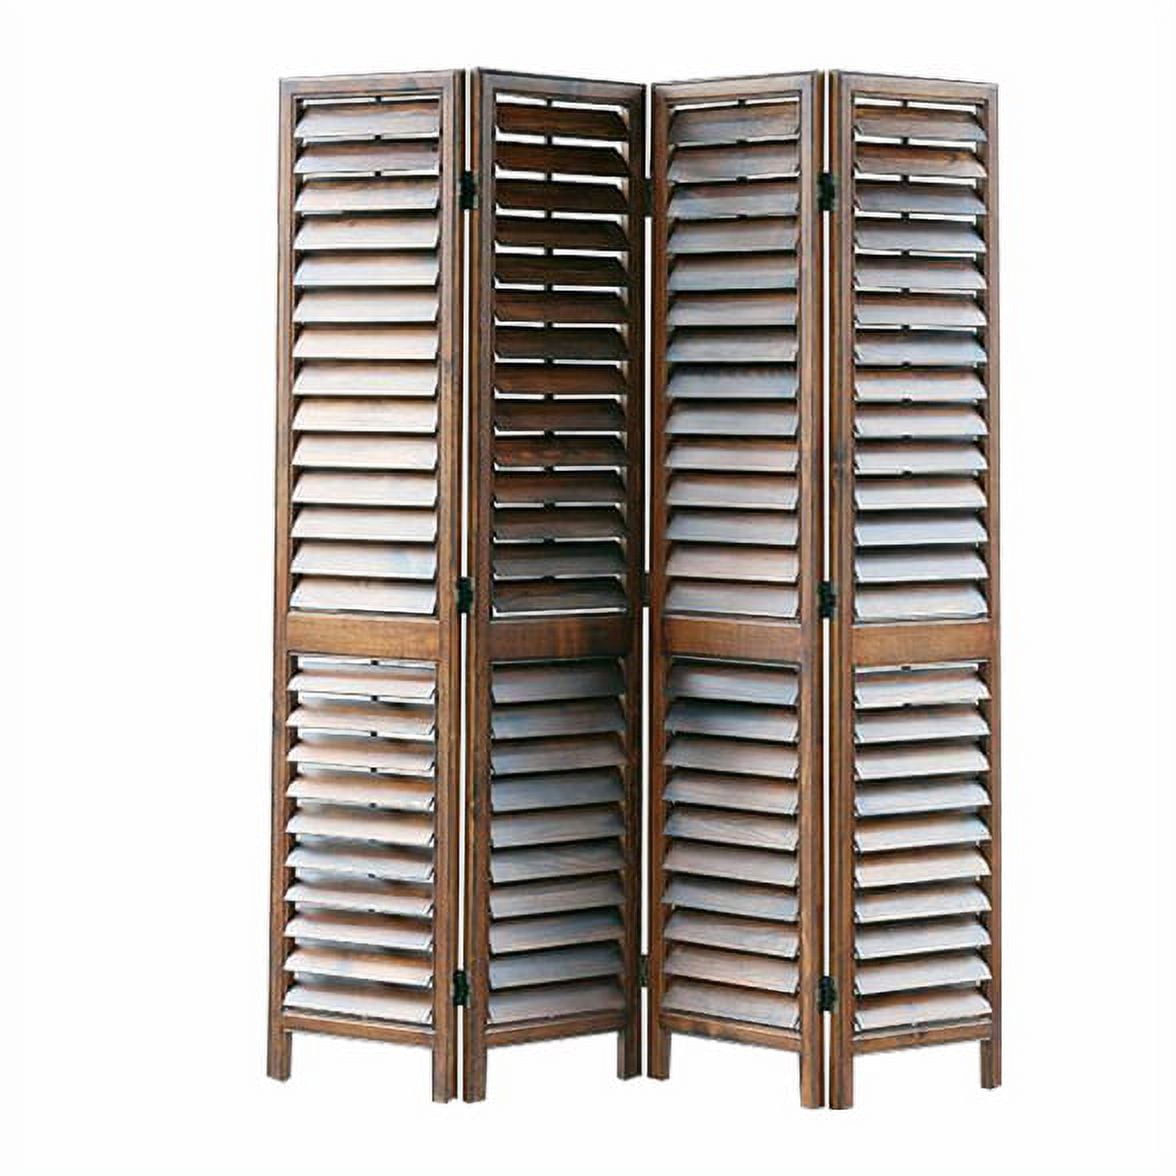 Picture of Benjara BM213426 4 Panel Shutter Design Wooden Screen with Straight Legs - Gray & Brown